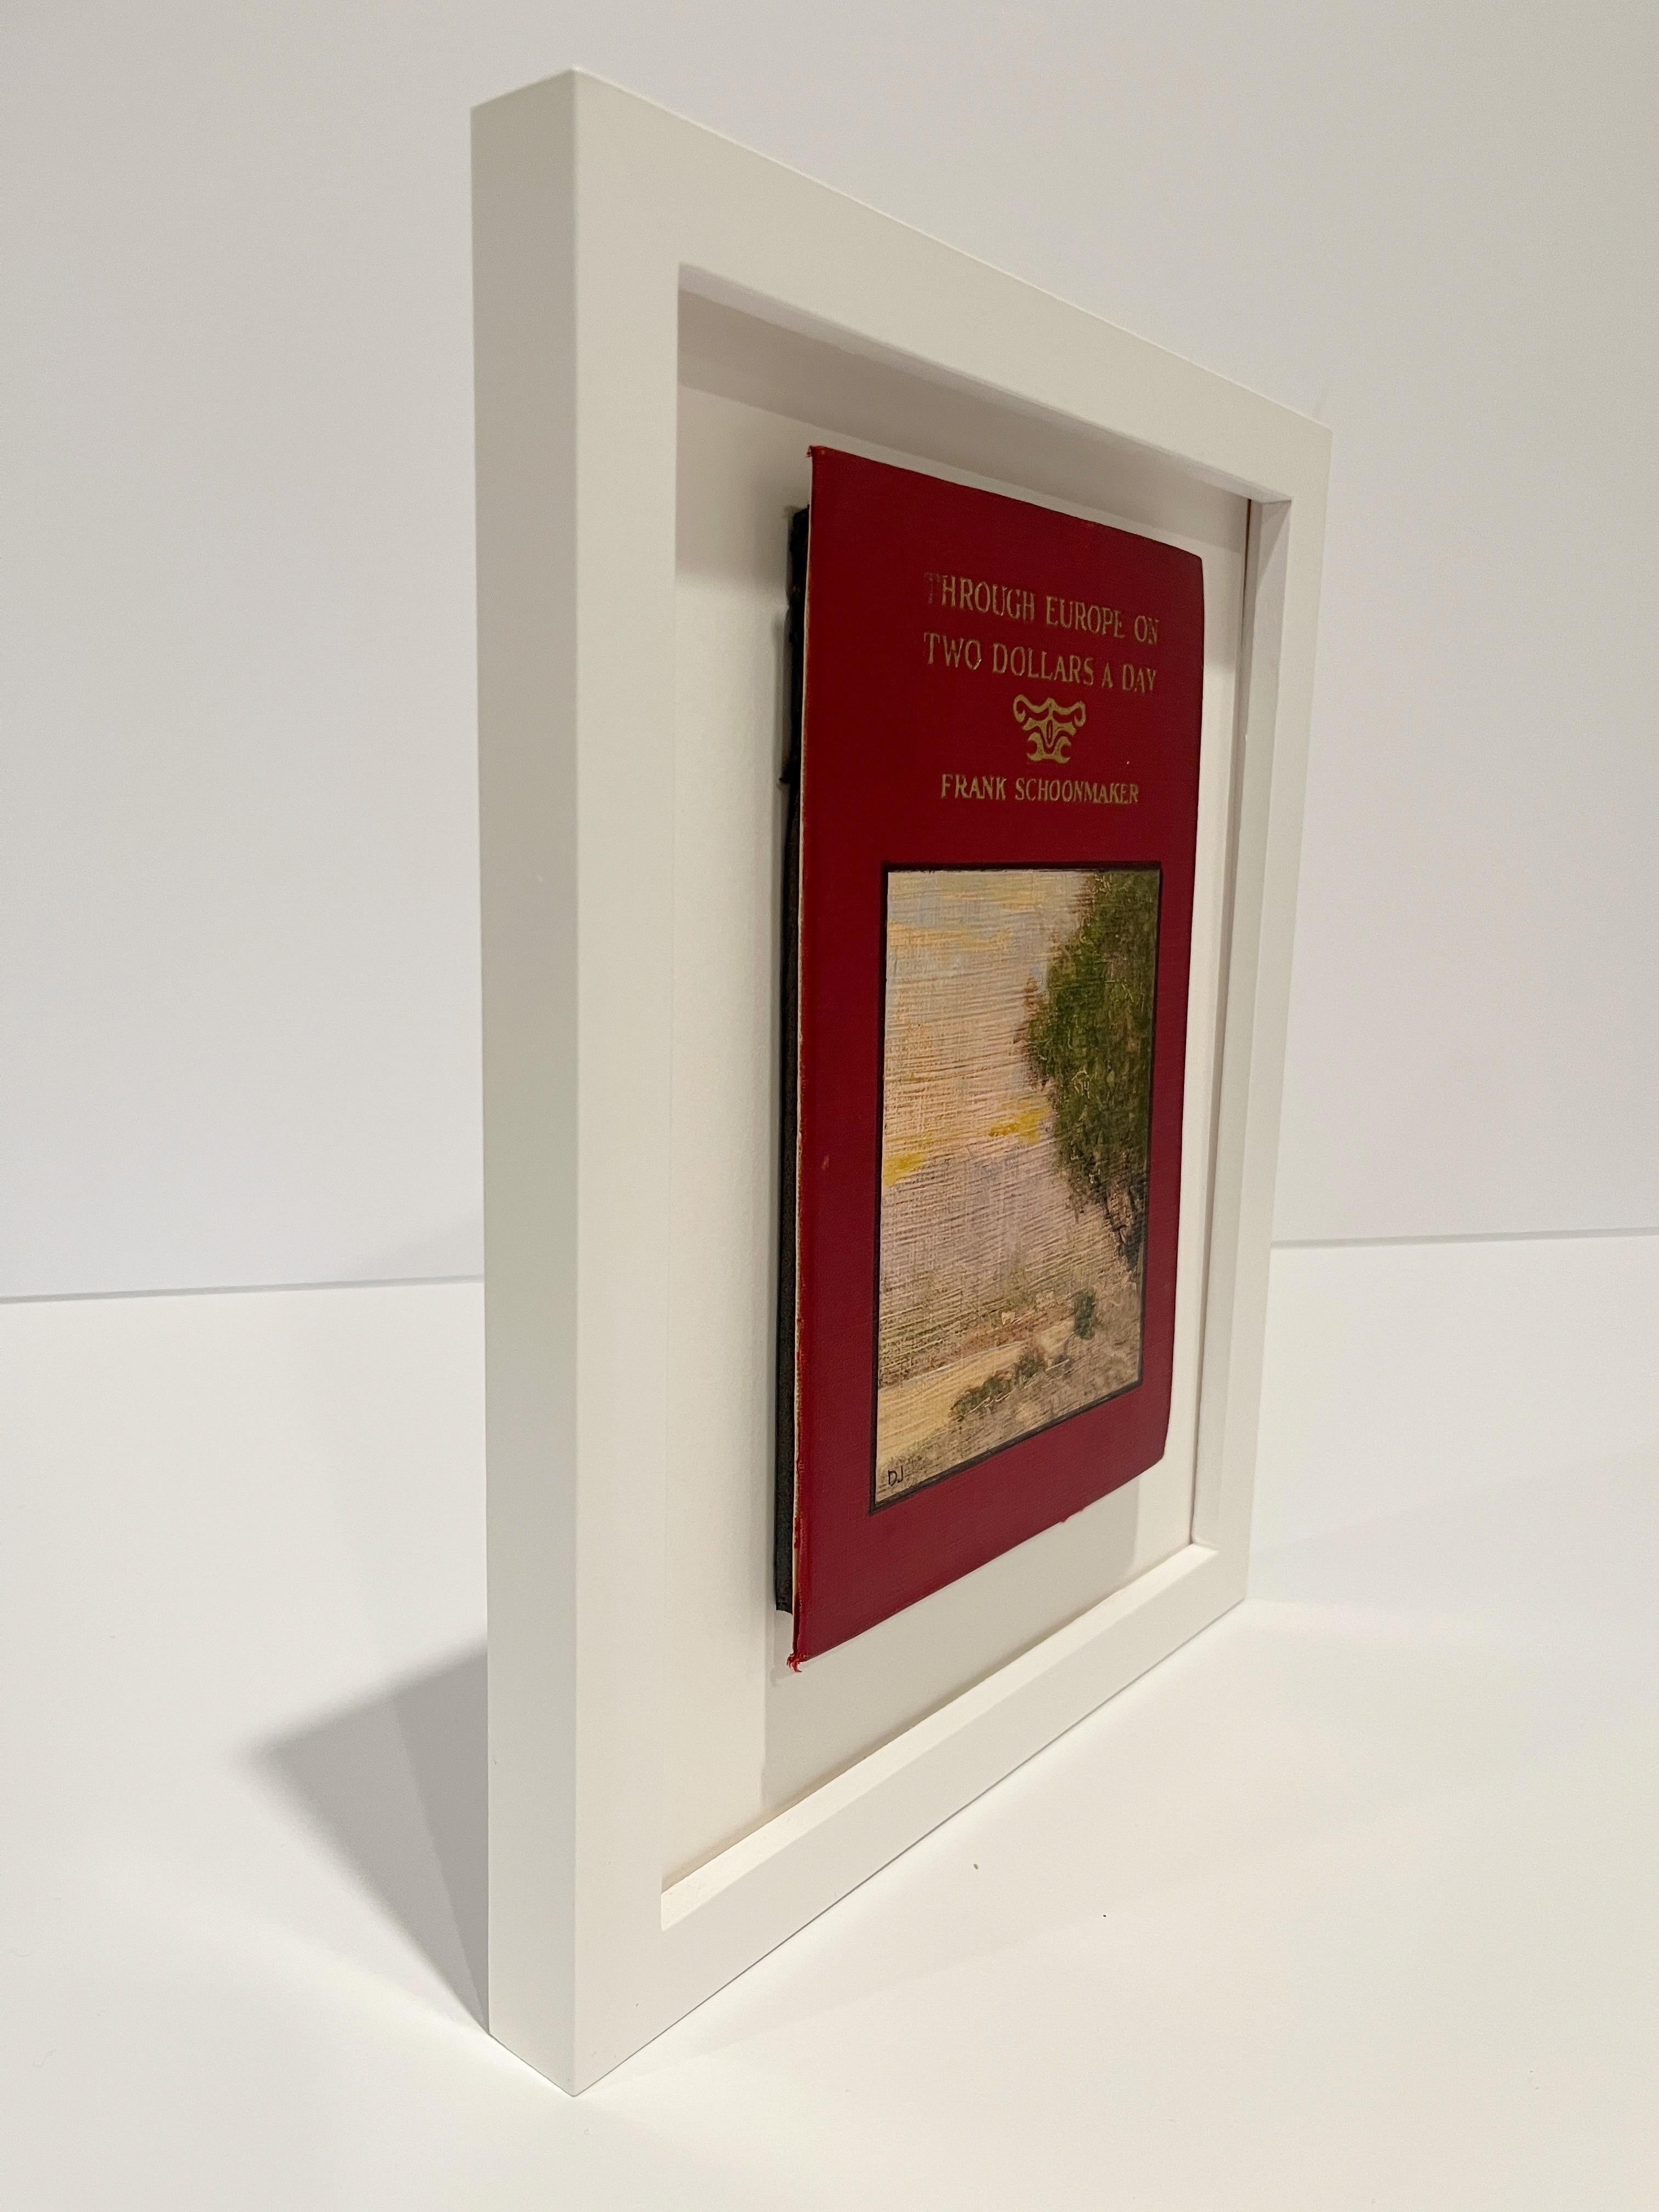 This is an original oil painting by master painter, Donald Jurney. The project was one near and dear to the artist's heart. A lover of books, Jurney rescued a number of old, cloth-bound books from oblivion, giving them new life by adding a painting